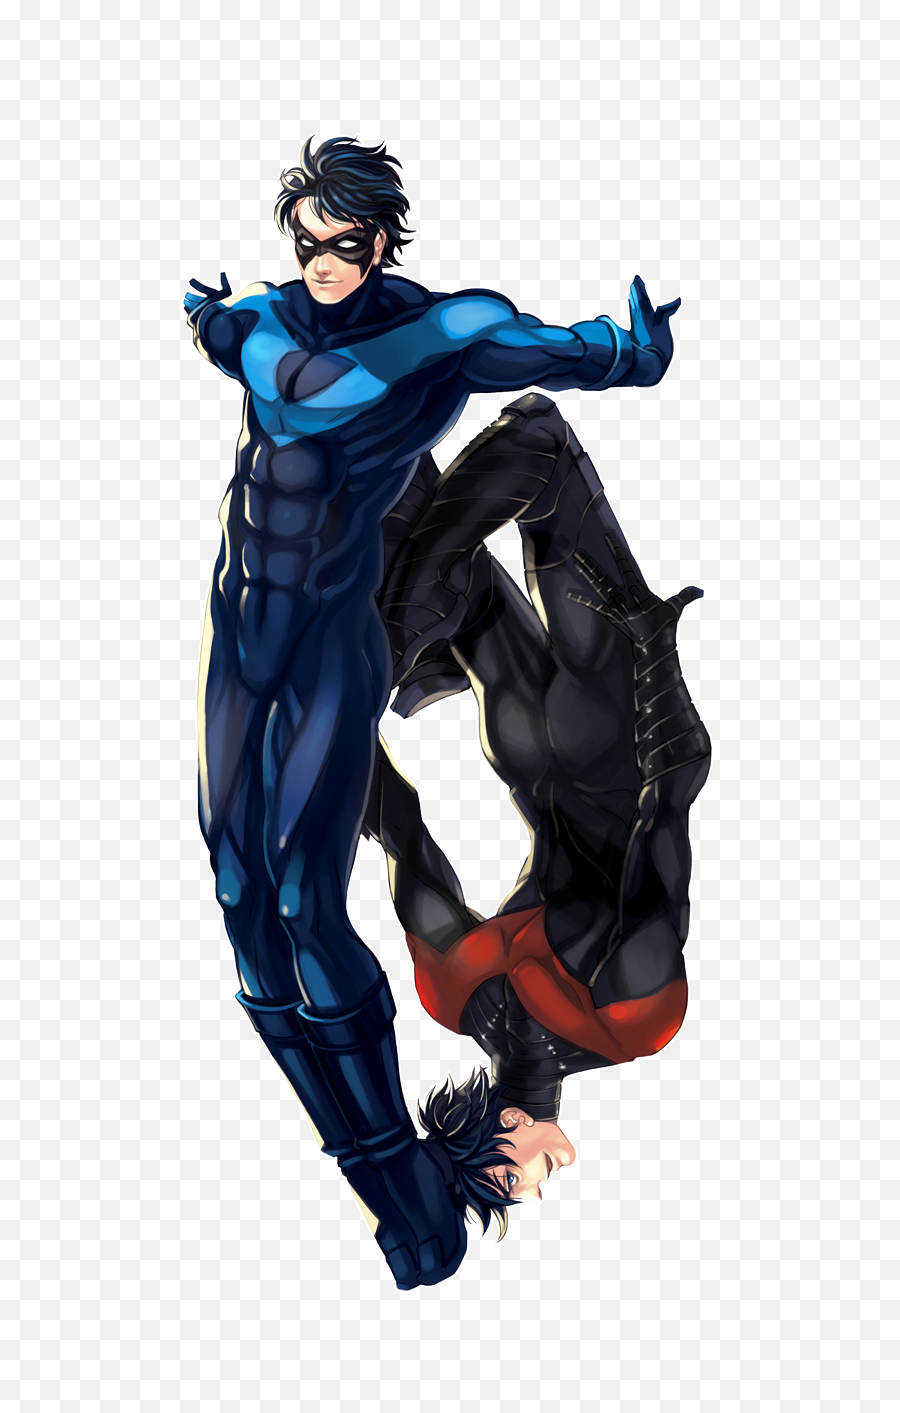 Dc Robin Png - All Versions Of Nightwing,Deathstroke Png